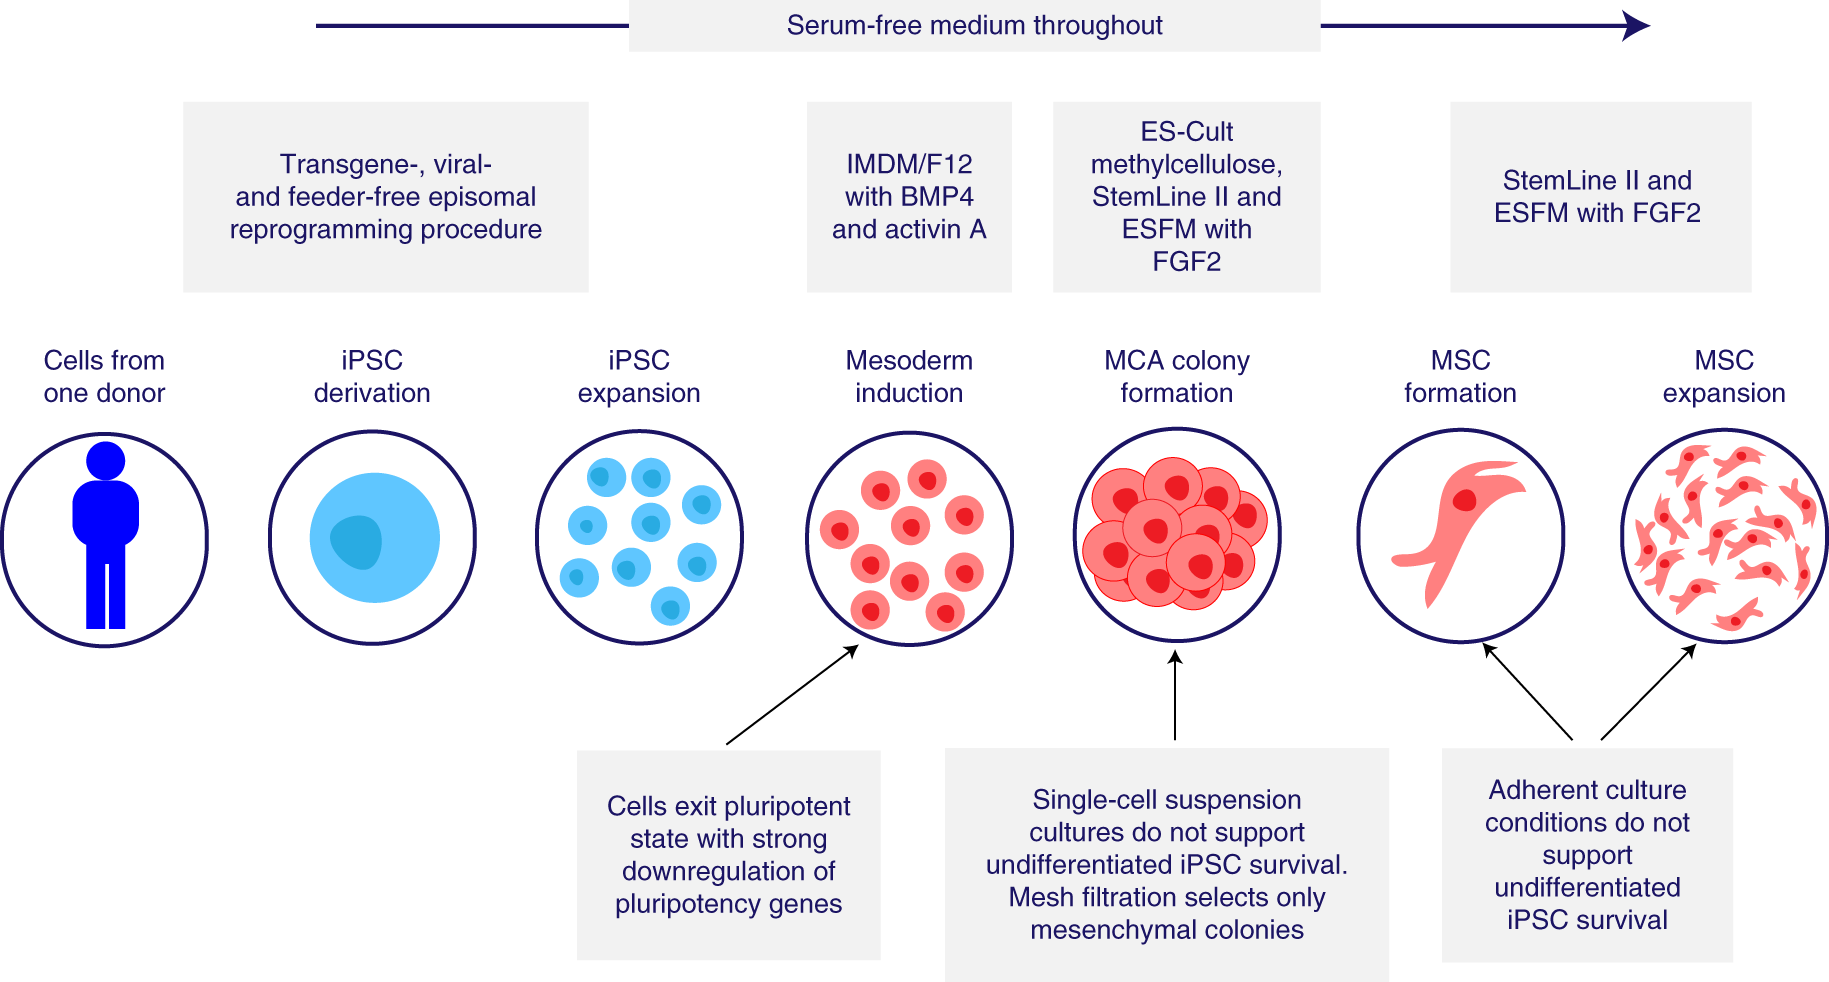 Production, safety and efficacy of iPSC-derived mesenchymal stromal cells  in acute steroid-resistant graft versus host disease: a phase I,  multicenter, open-label, dose-escalation study | Nature Medicine